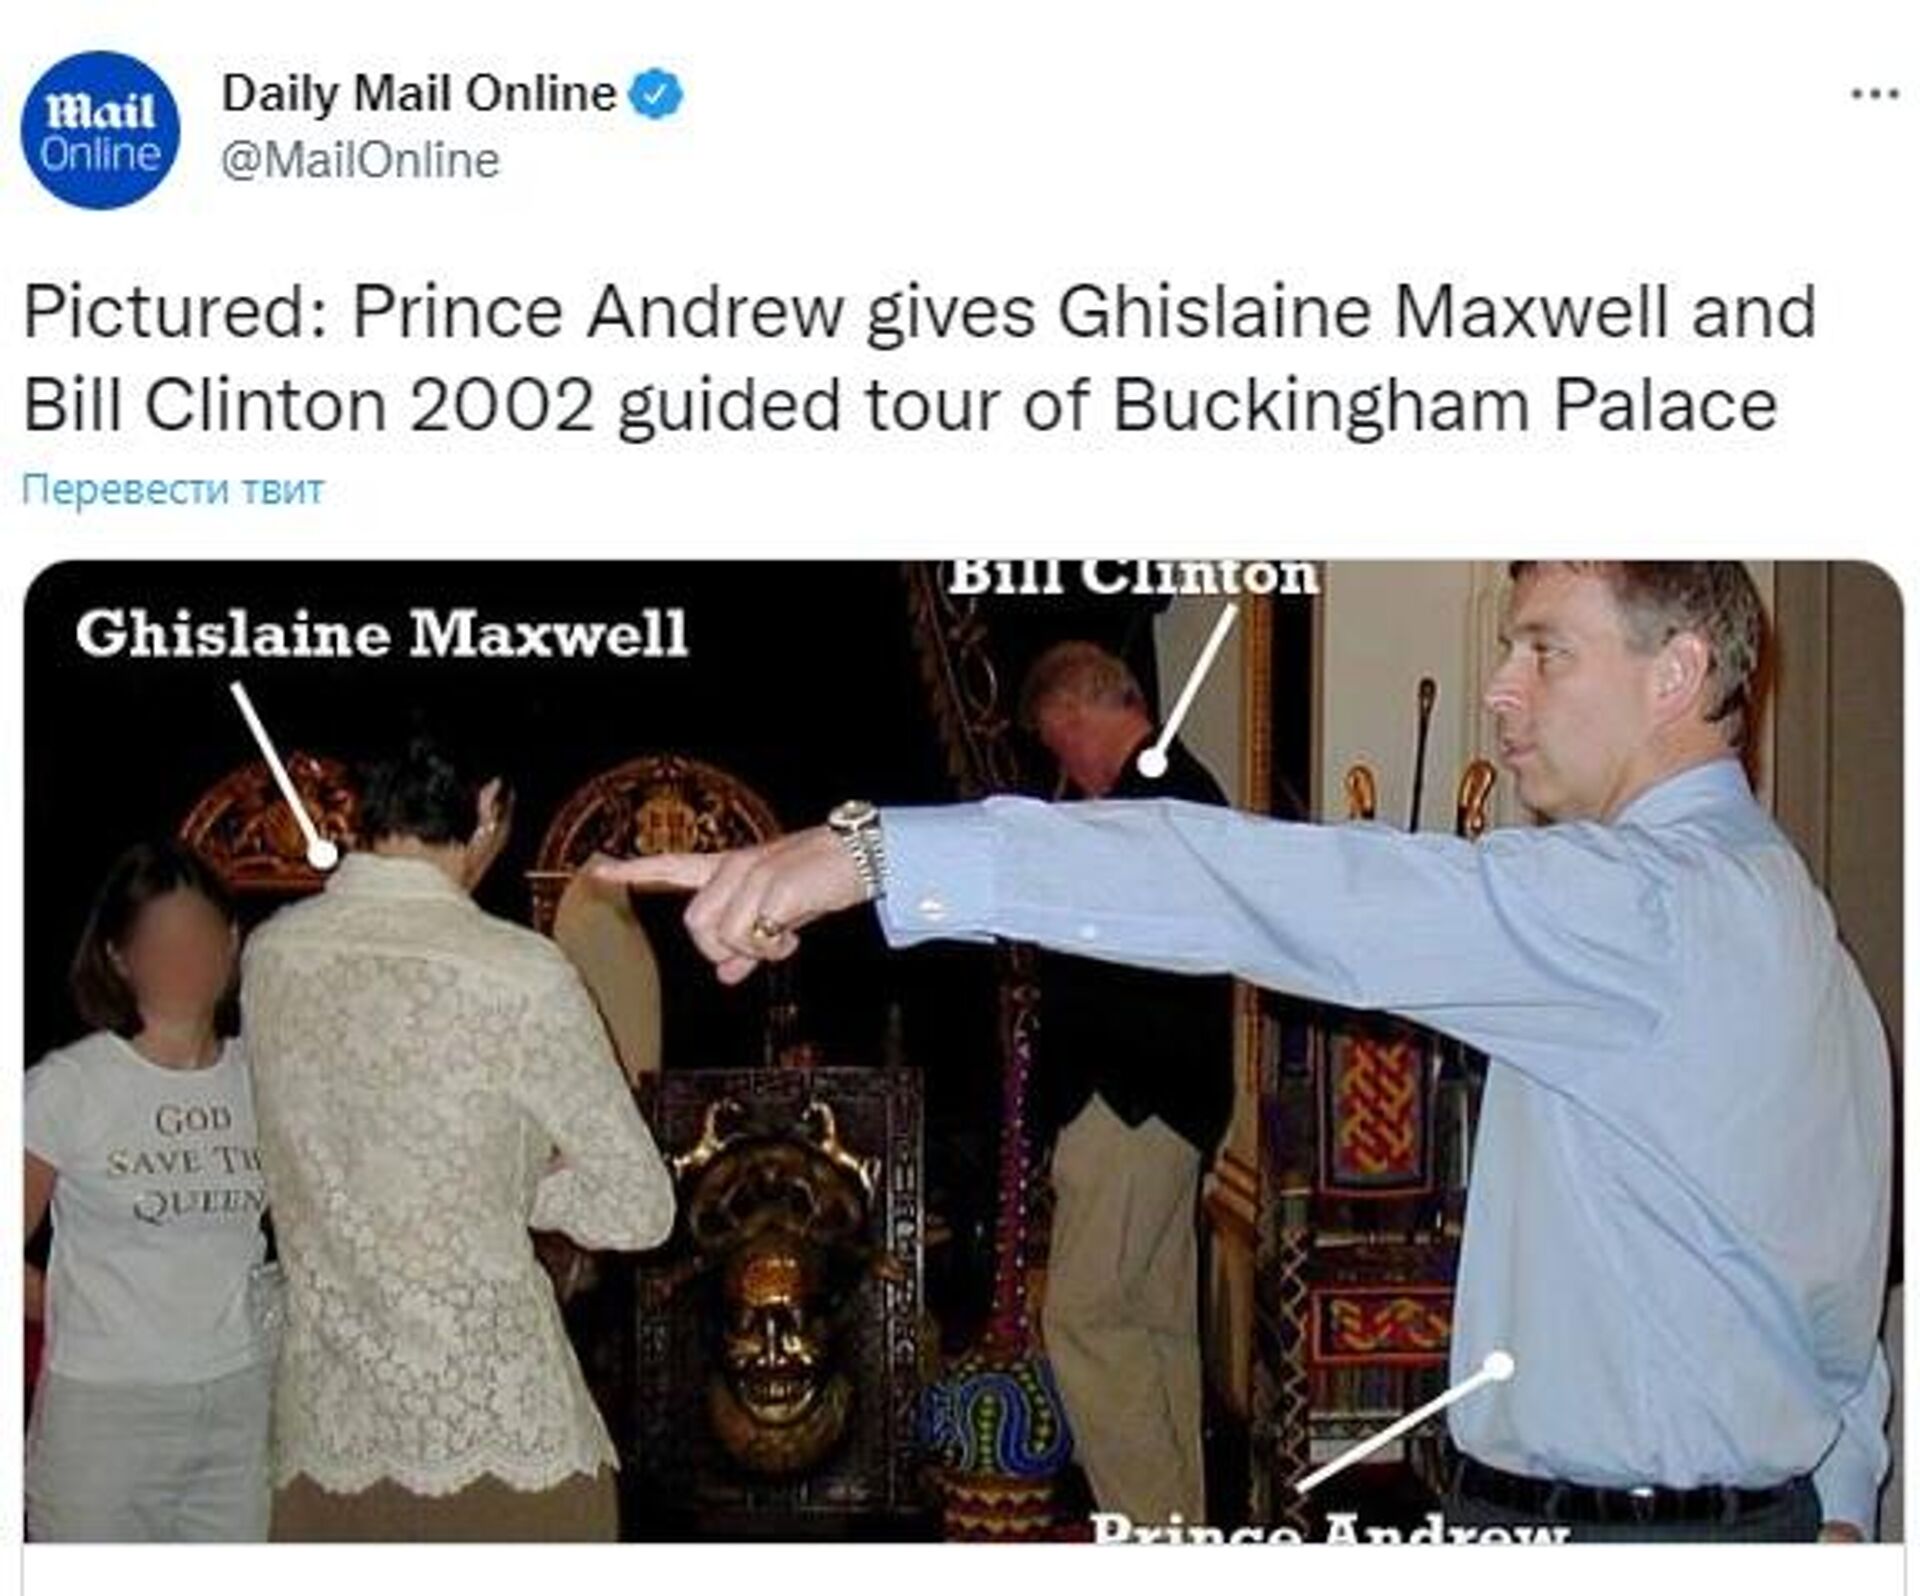  Prince Andrew gives Ghislaine Maxwell and Bill Clinton 2002 guided tour of Buckingham Palace - Sputnik International, 1920, 13.02.2022